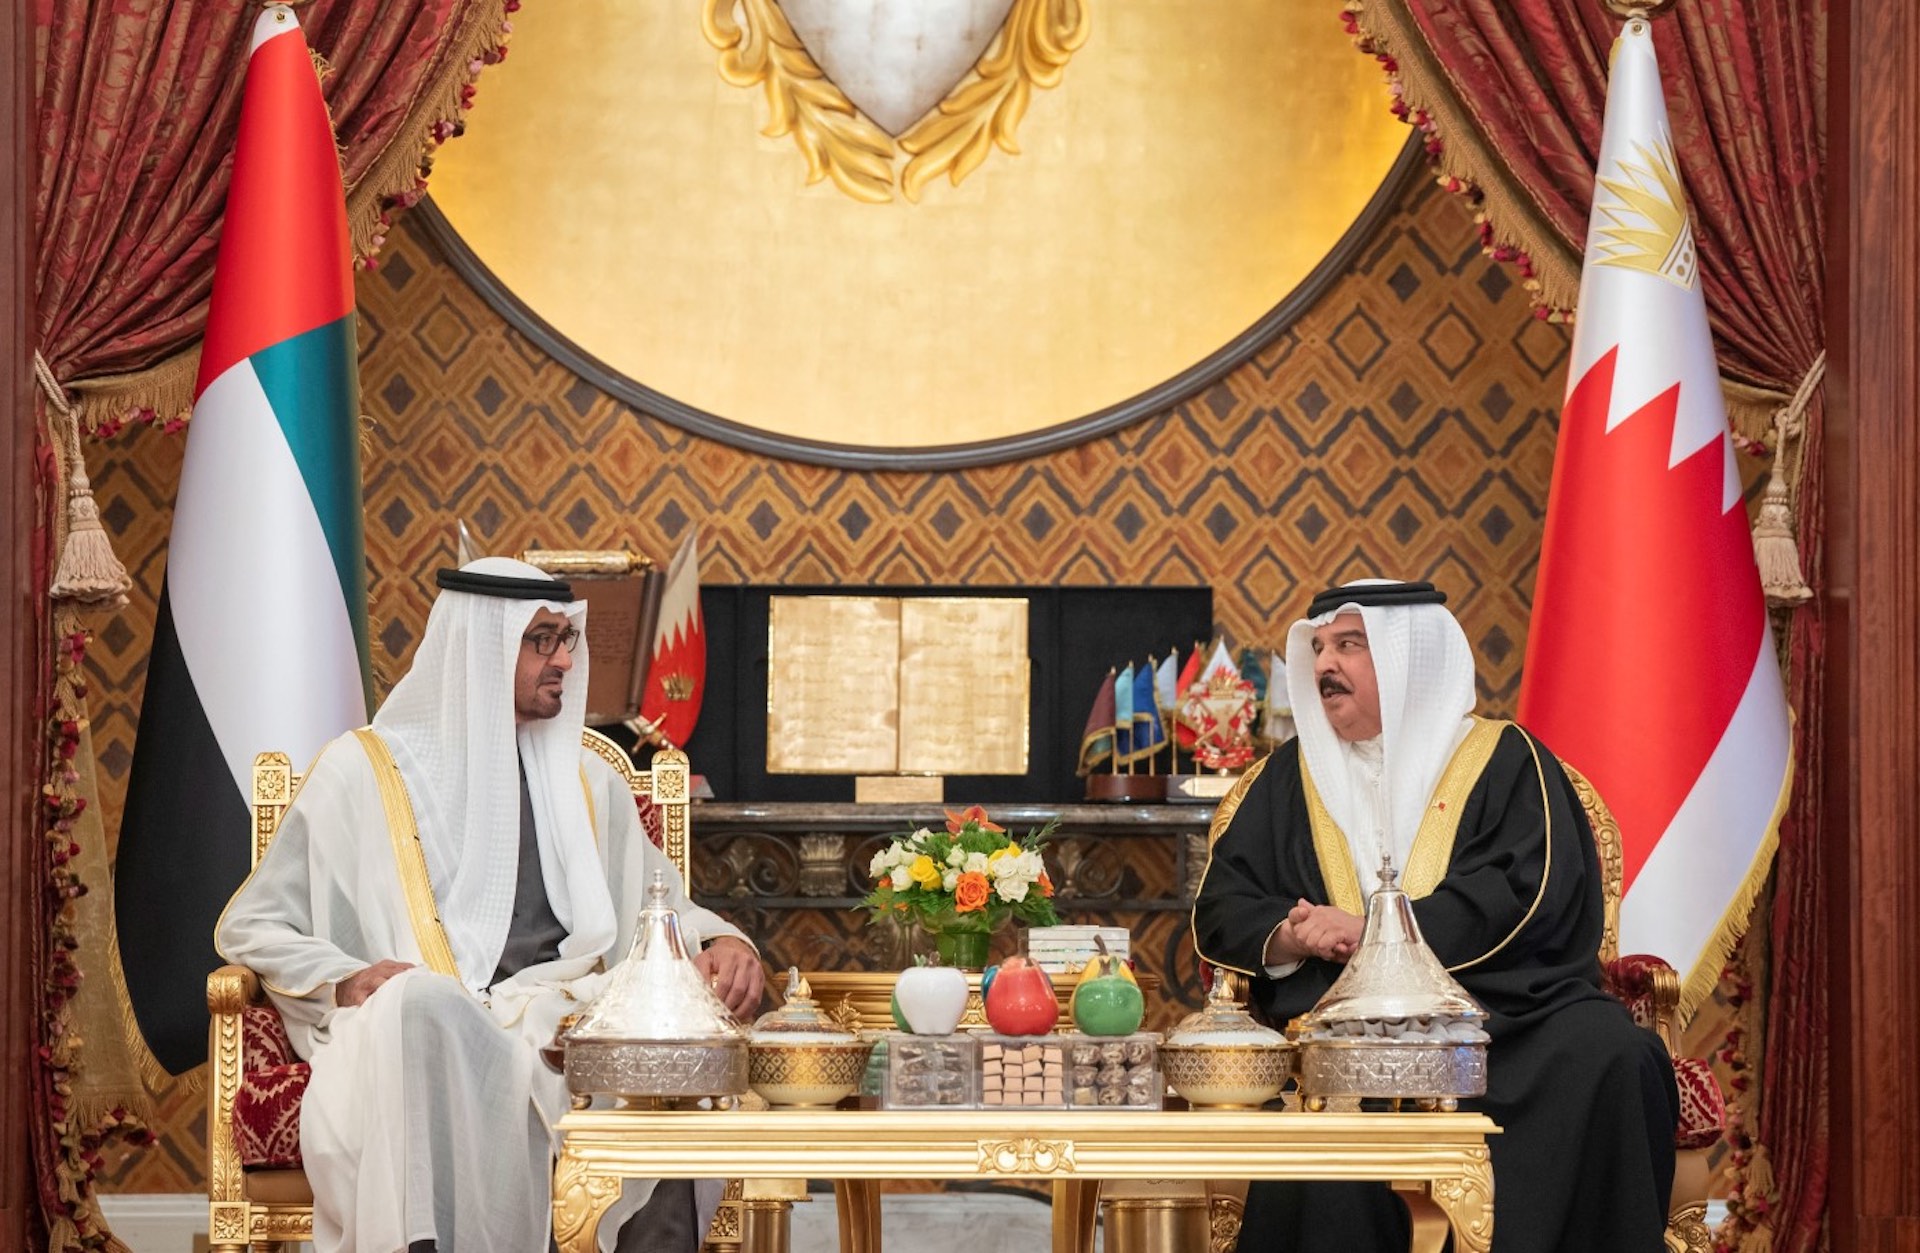 King of Bahrain, Mohammed bin Zayed discuss strengthening cooperation